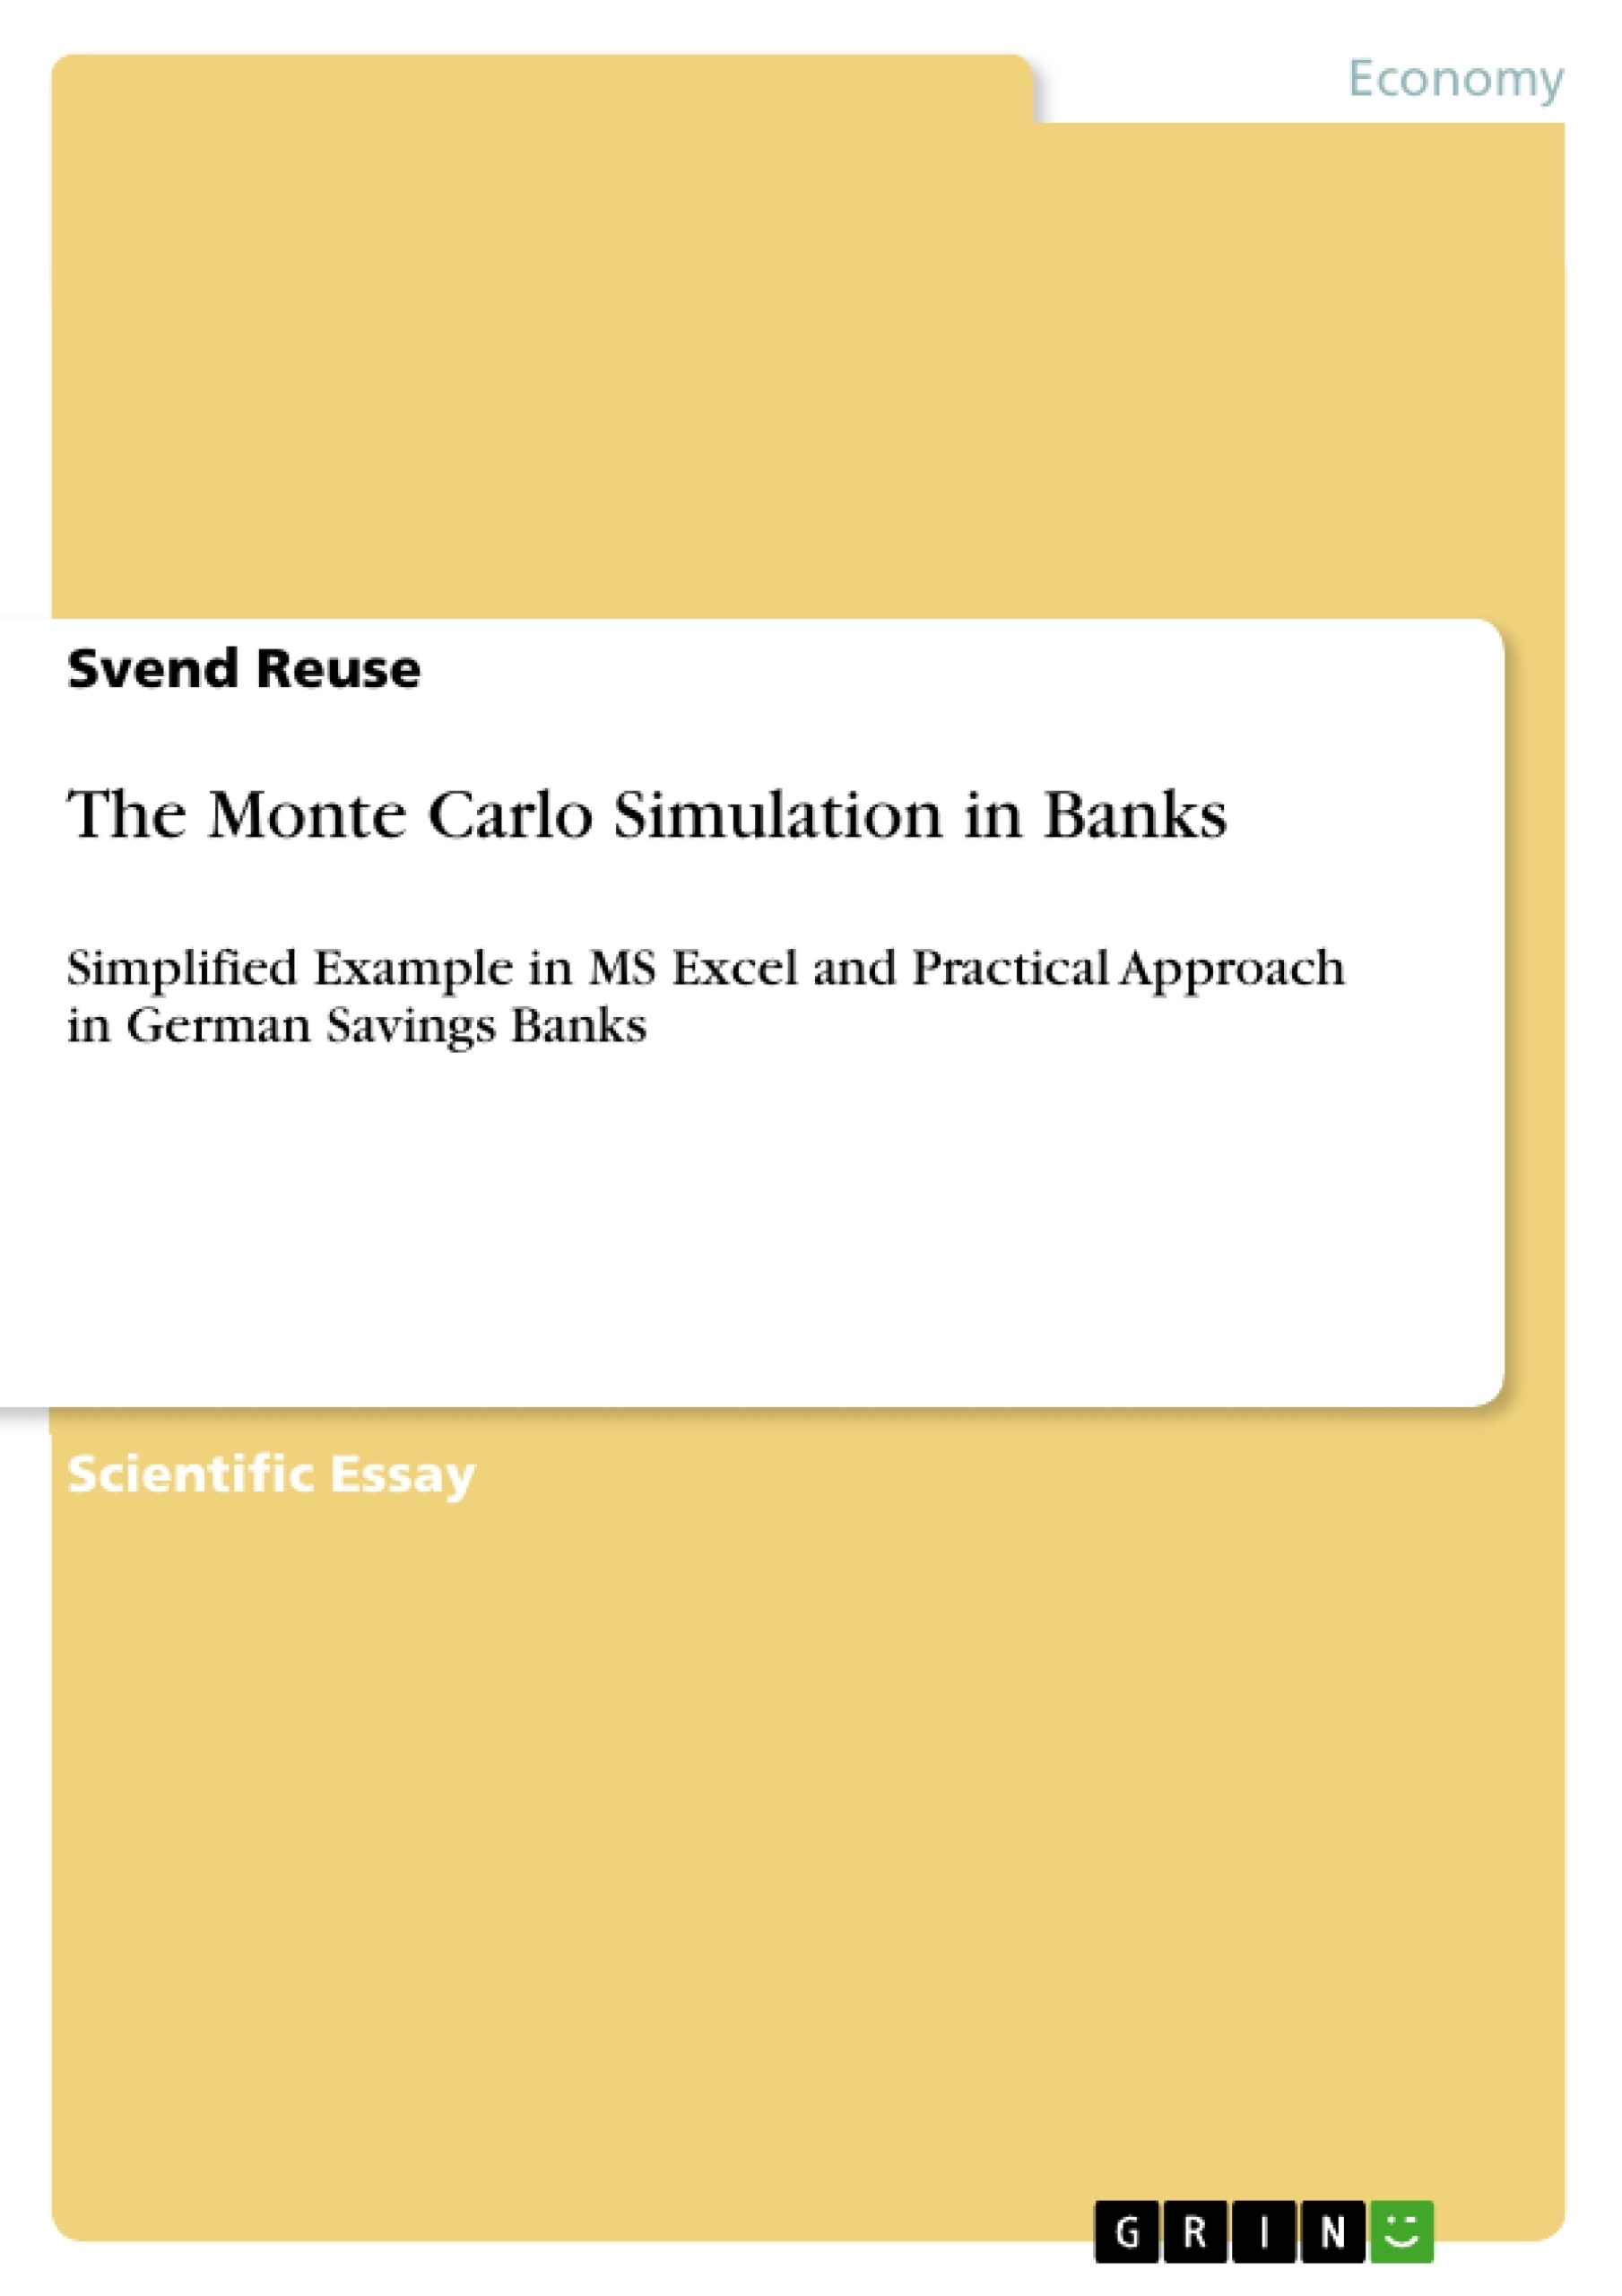 Title: The Monte Carlo Simulation in Banks 